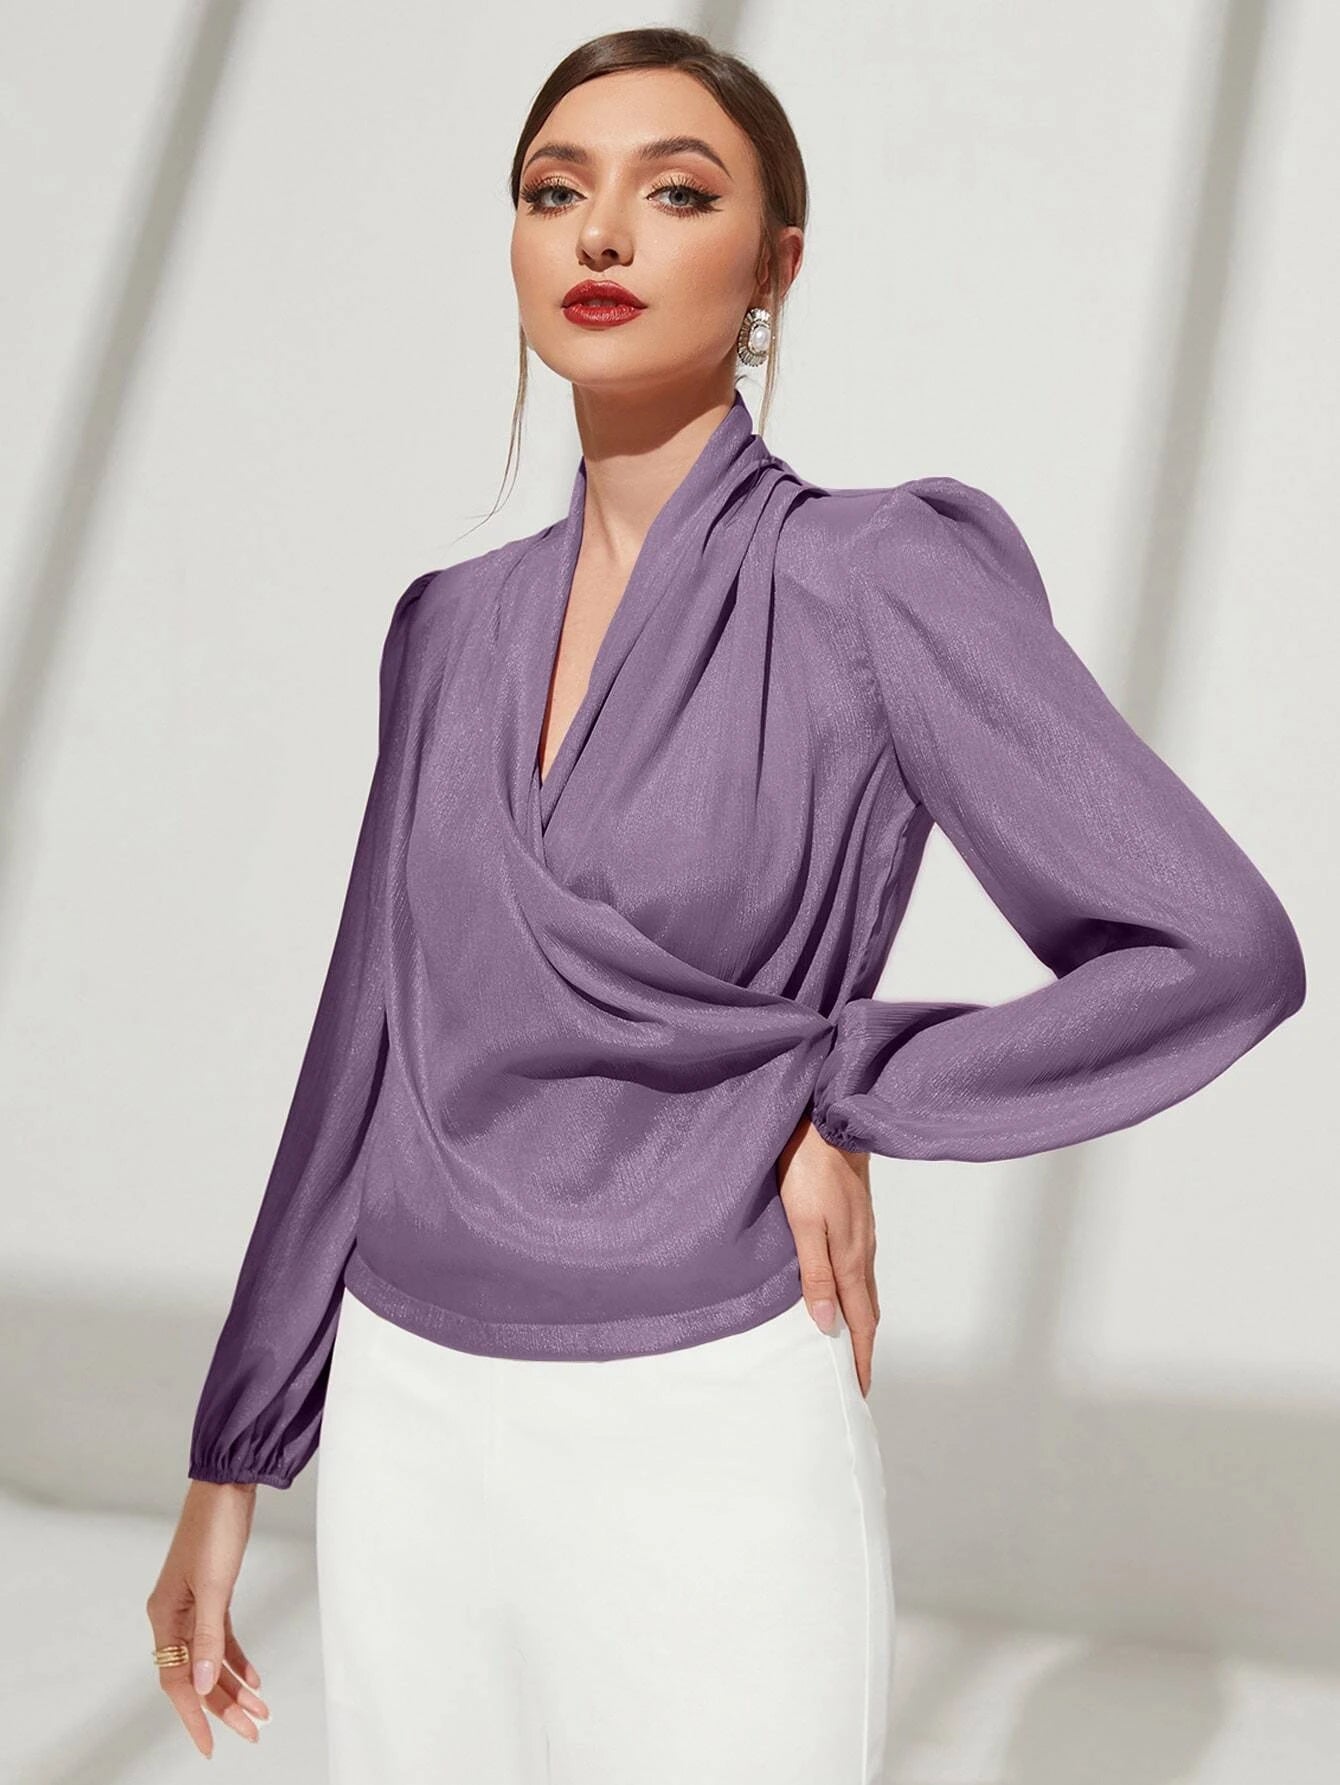 SHEIN Modely Solid Surplice Front Lantern Sleeve Blouse